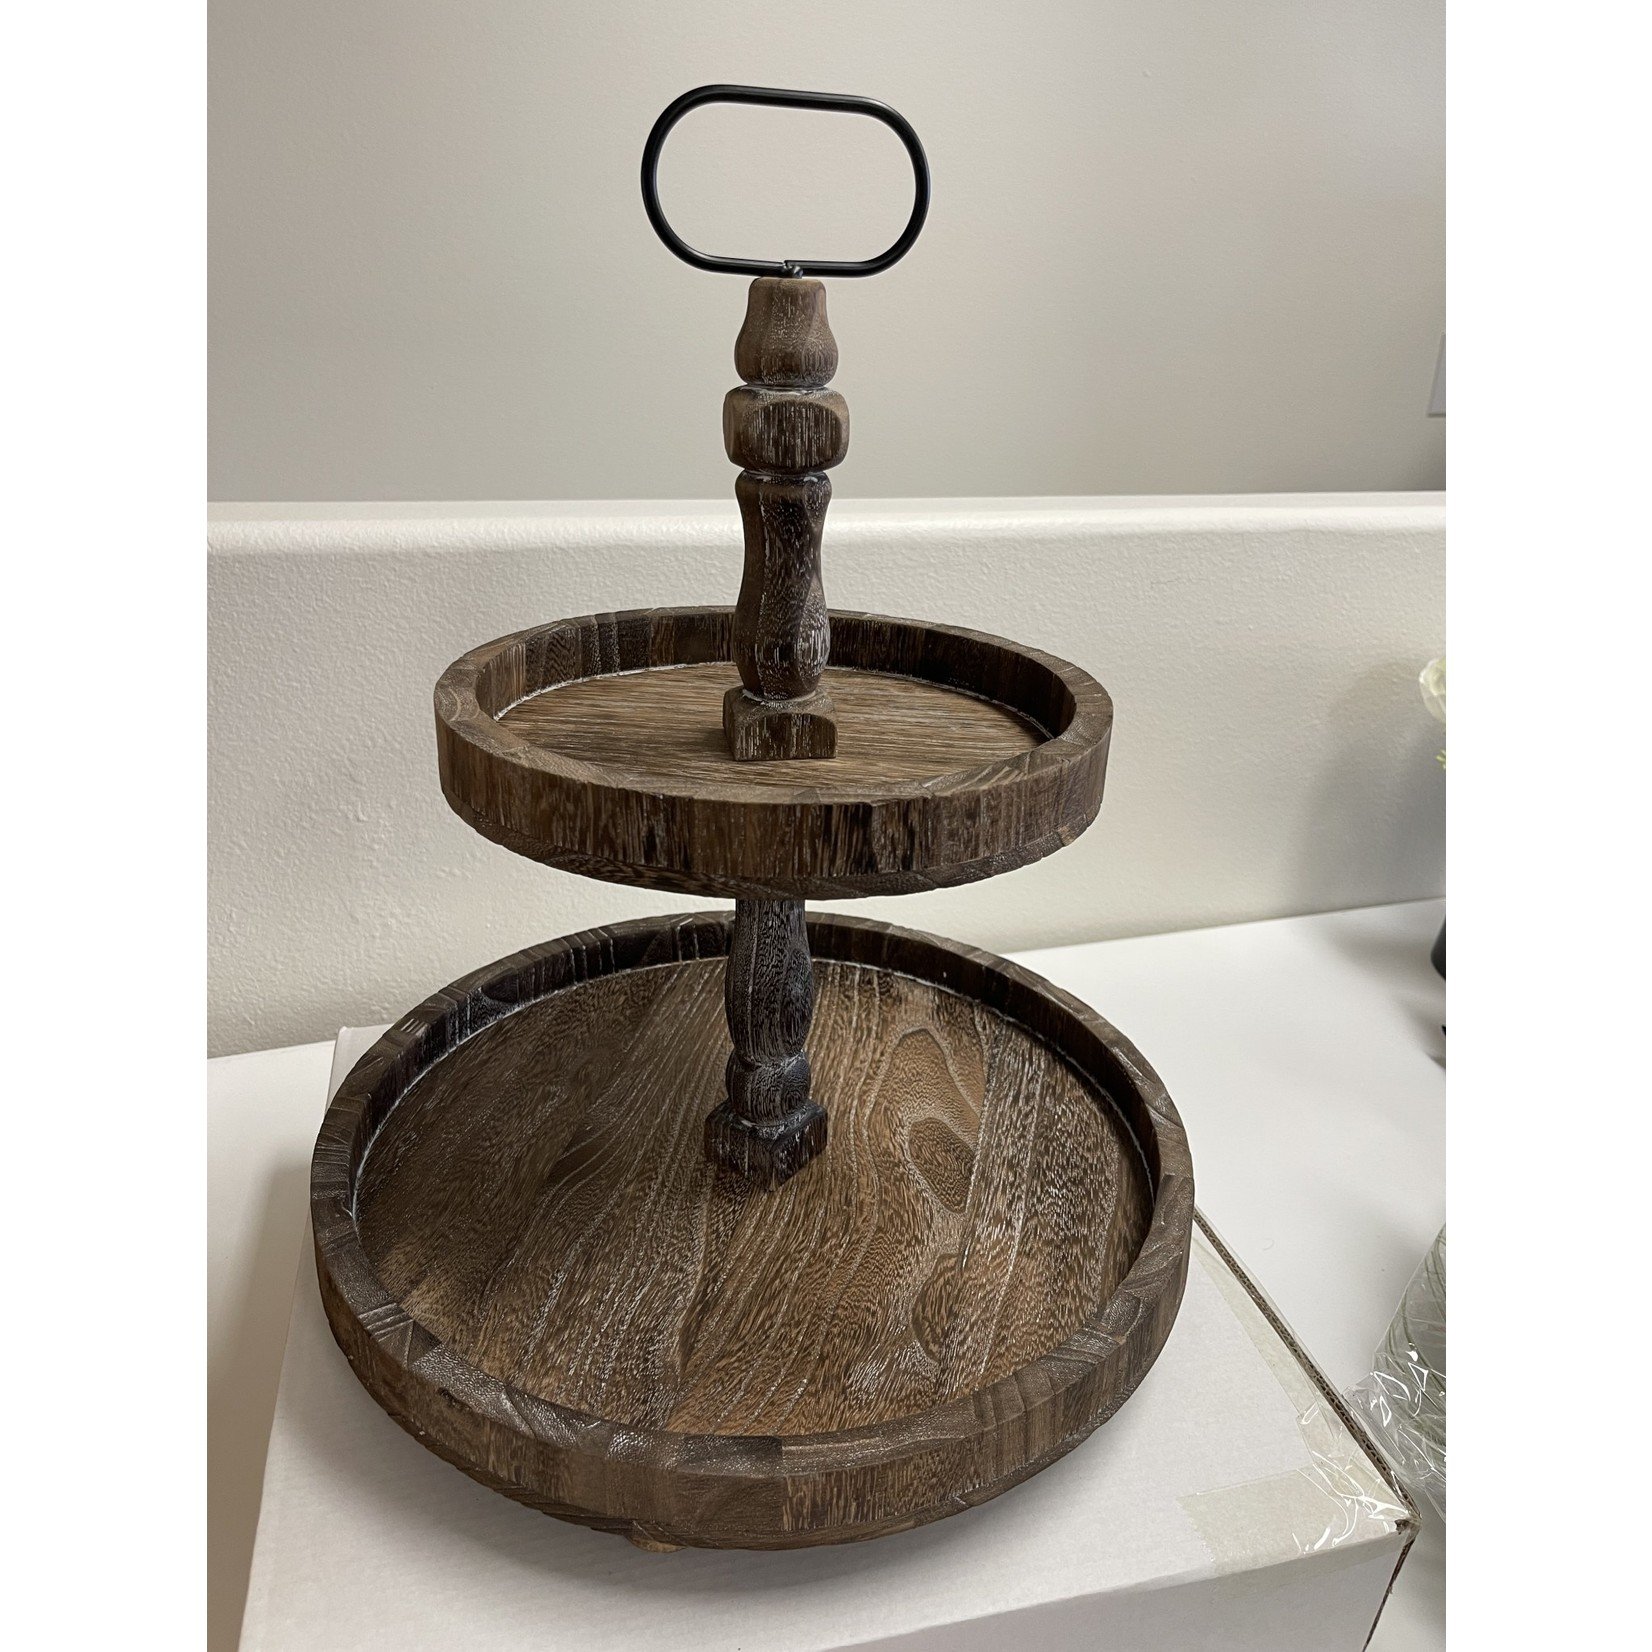 Foundations Decor Tiered Tray - Antique Finish, Round, 15"